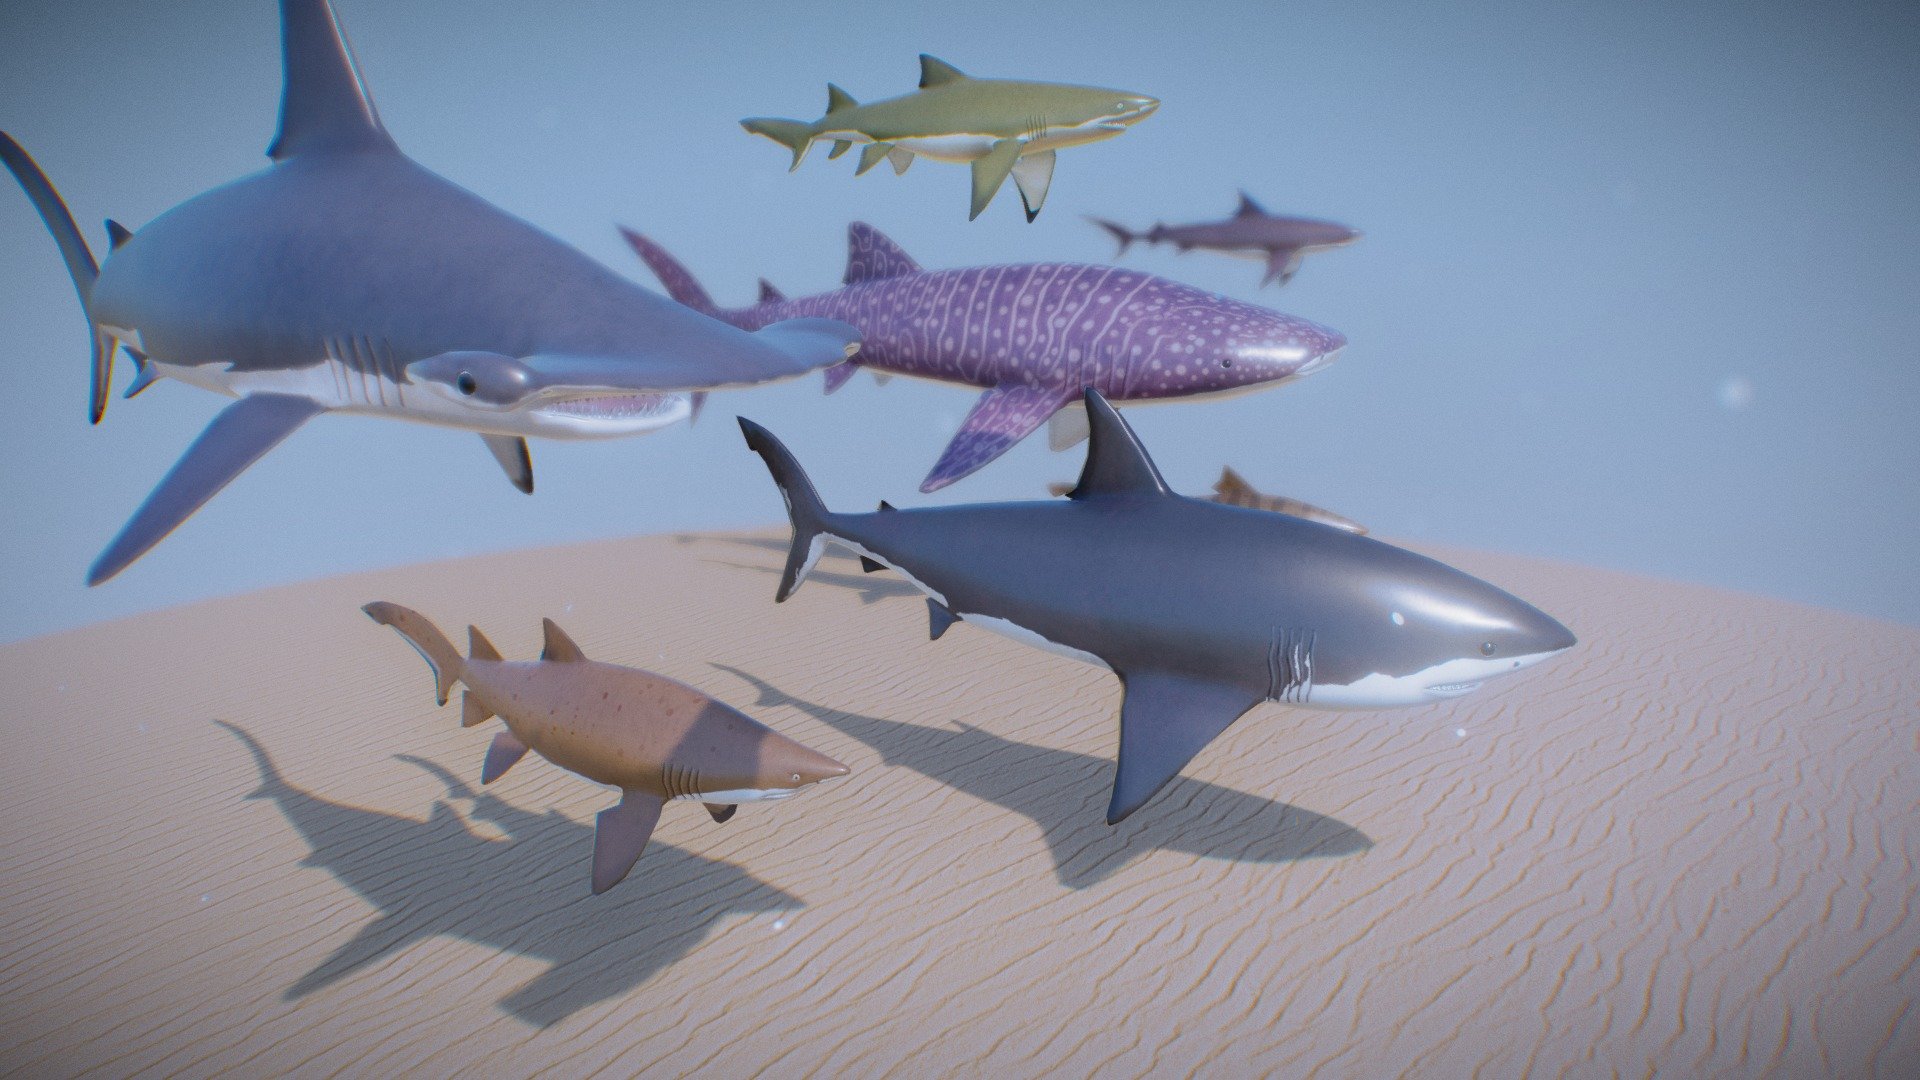 😍 😍 😍 So cute. They swim together as friends. They remind me of the godfather in Shark Tale. 
They will be avaliable in the Unity Asset Store very soon. They are scary I know, but if you treat them gently they will not bite 😌.

Reference videos:
-   https://youtu.be/dO215s1QaEM
-   https://youtu.be/y6A1oeg-wI - Seven Sharks Species - Download Free 3D model by Alenzo (@alextkd2003) 3d model